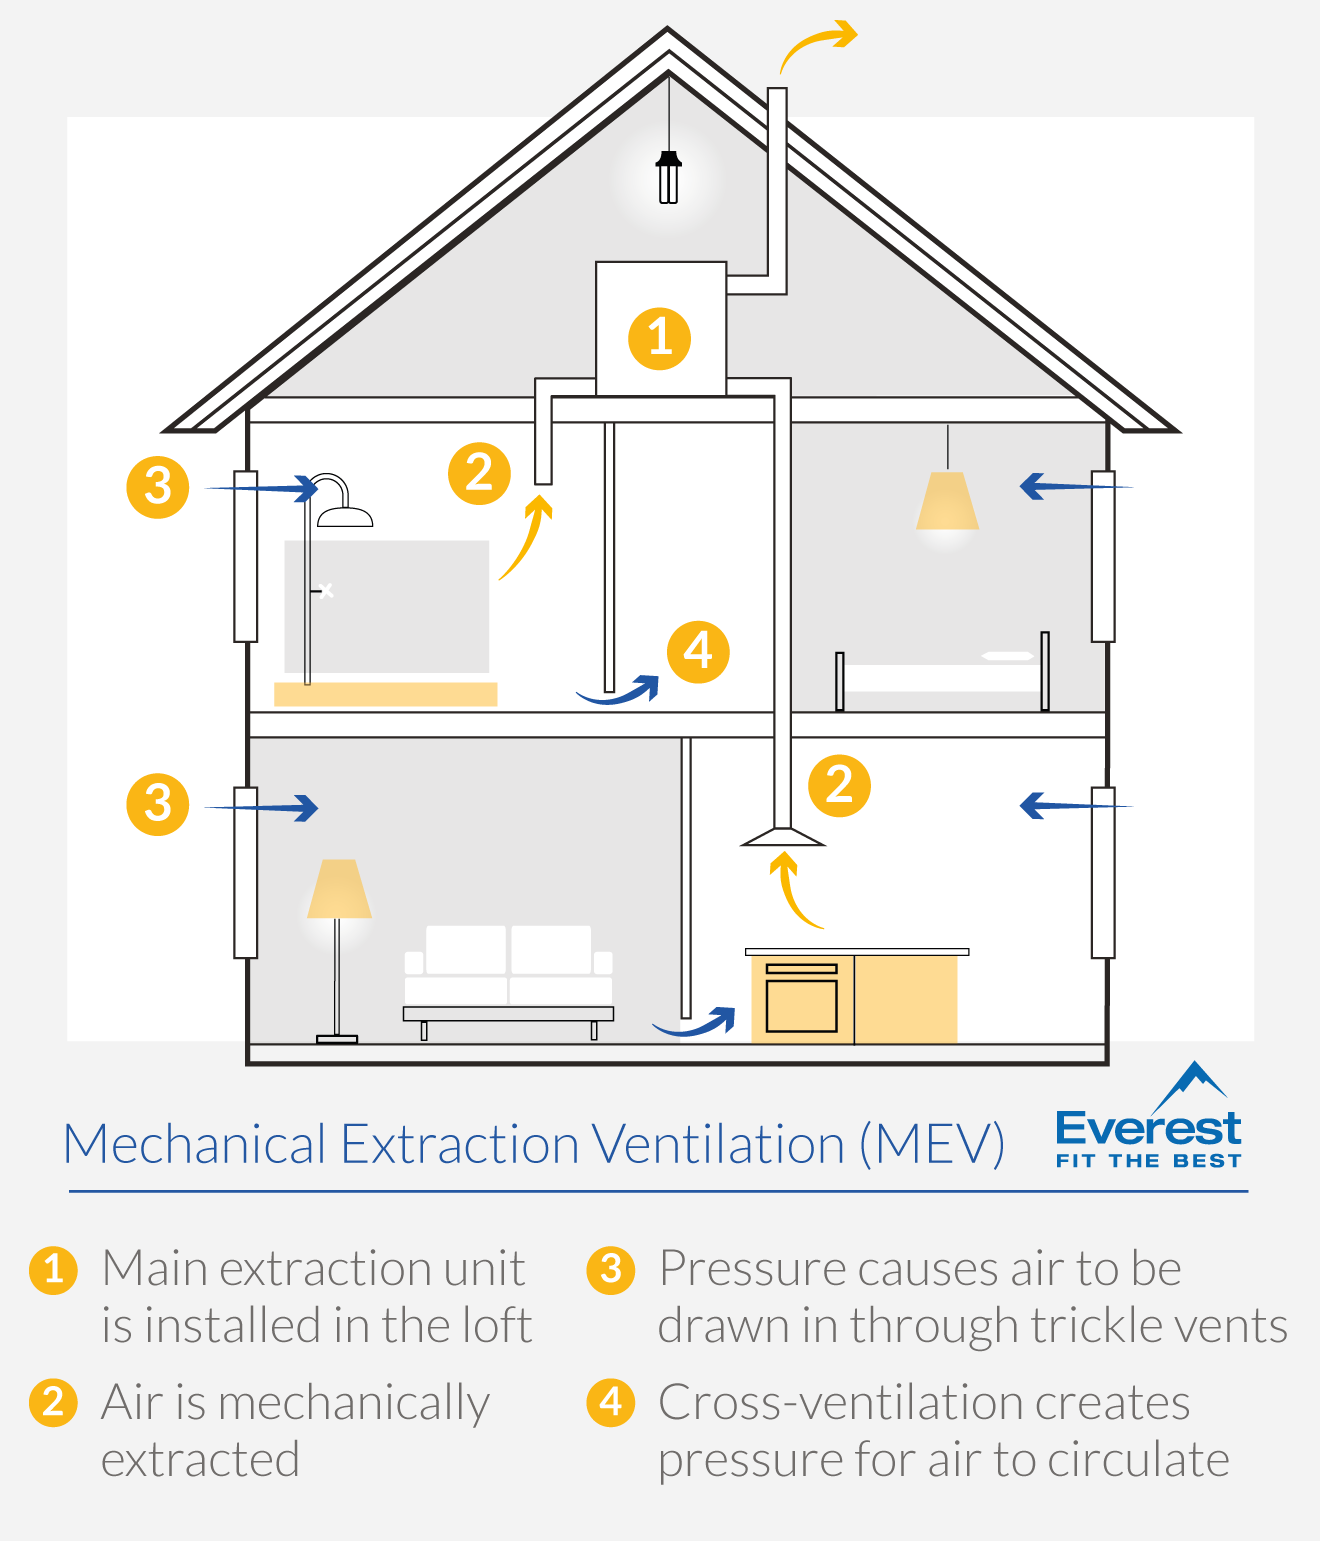 What is Mechanical extract ventilation (MEV)?